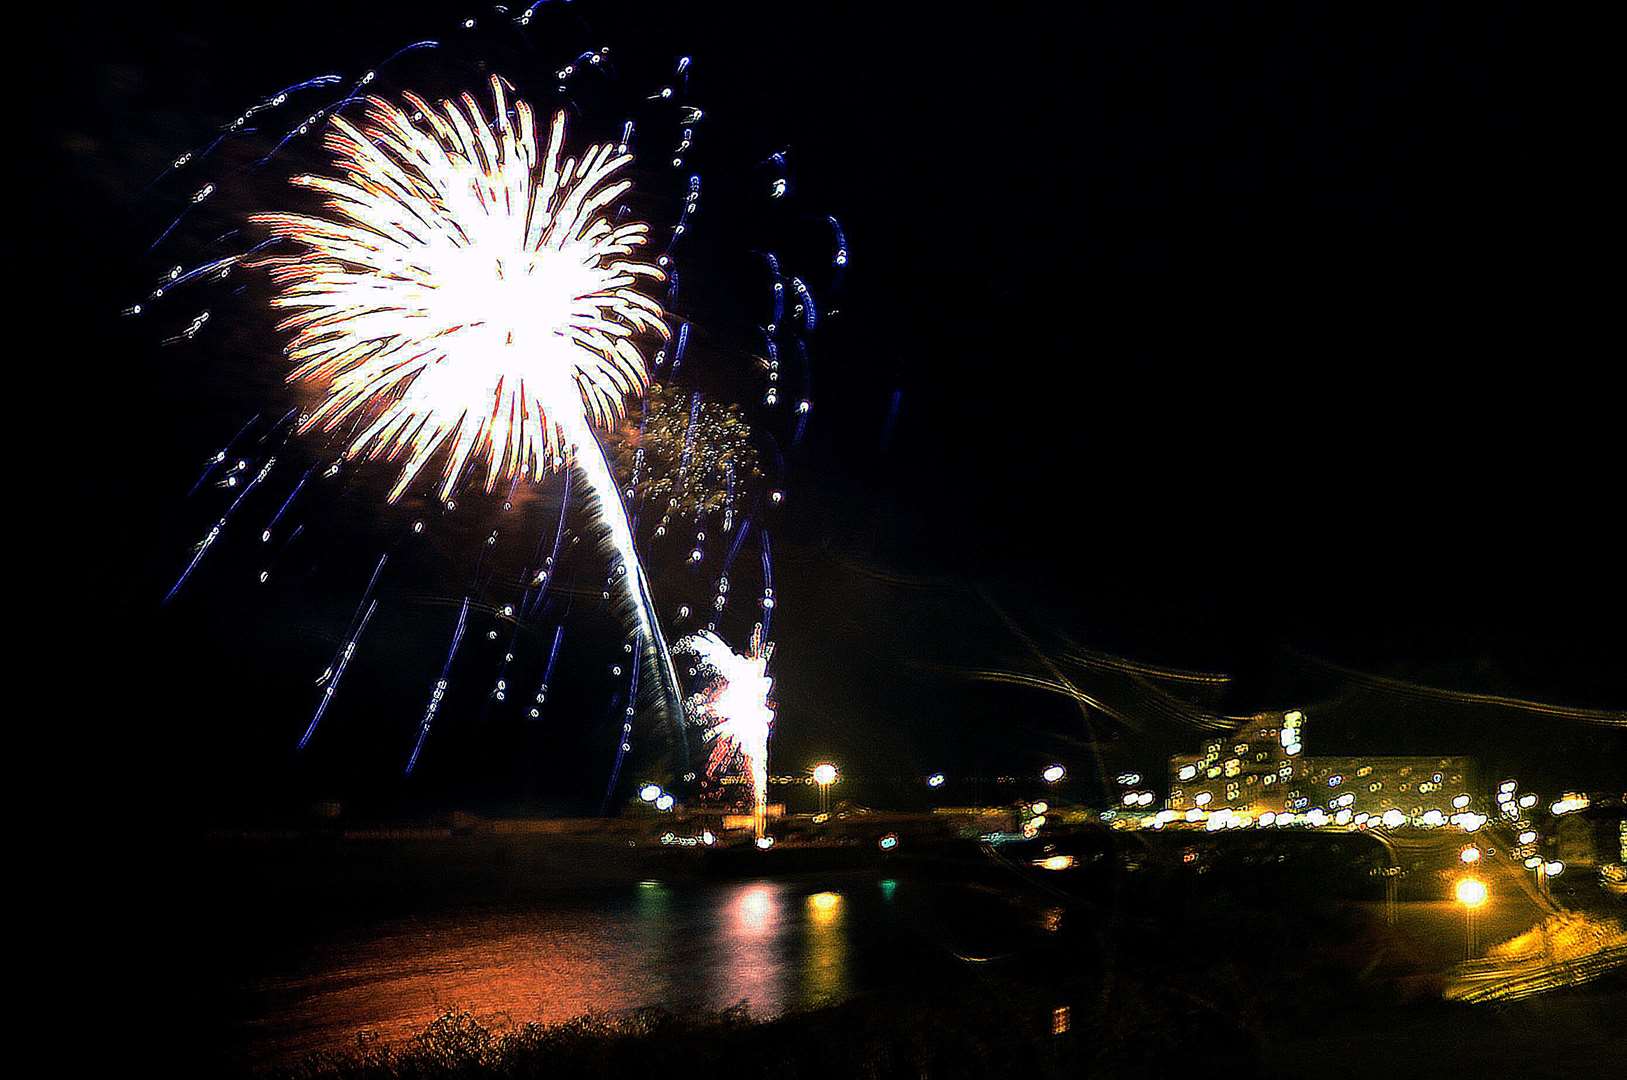 Bad weather is threatening events across Folkestone. Pictured is a fireworks display at Folkestone Harbour. Picture: Barry Goodwin